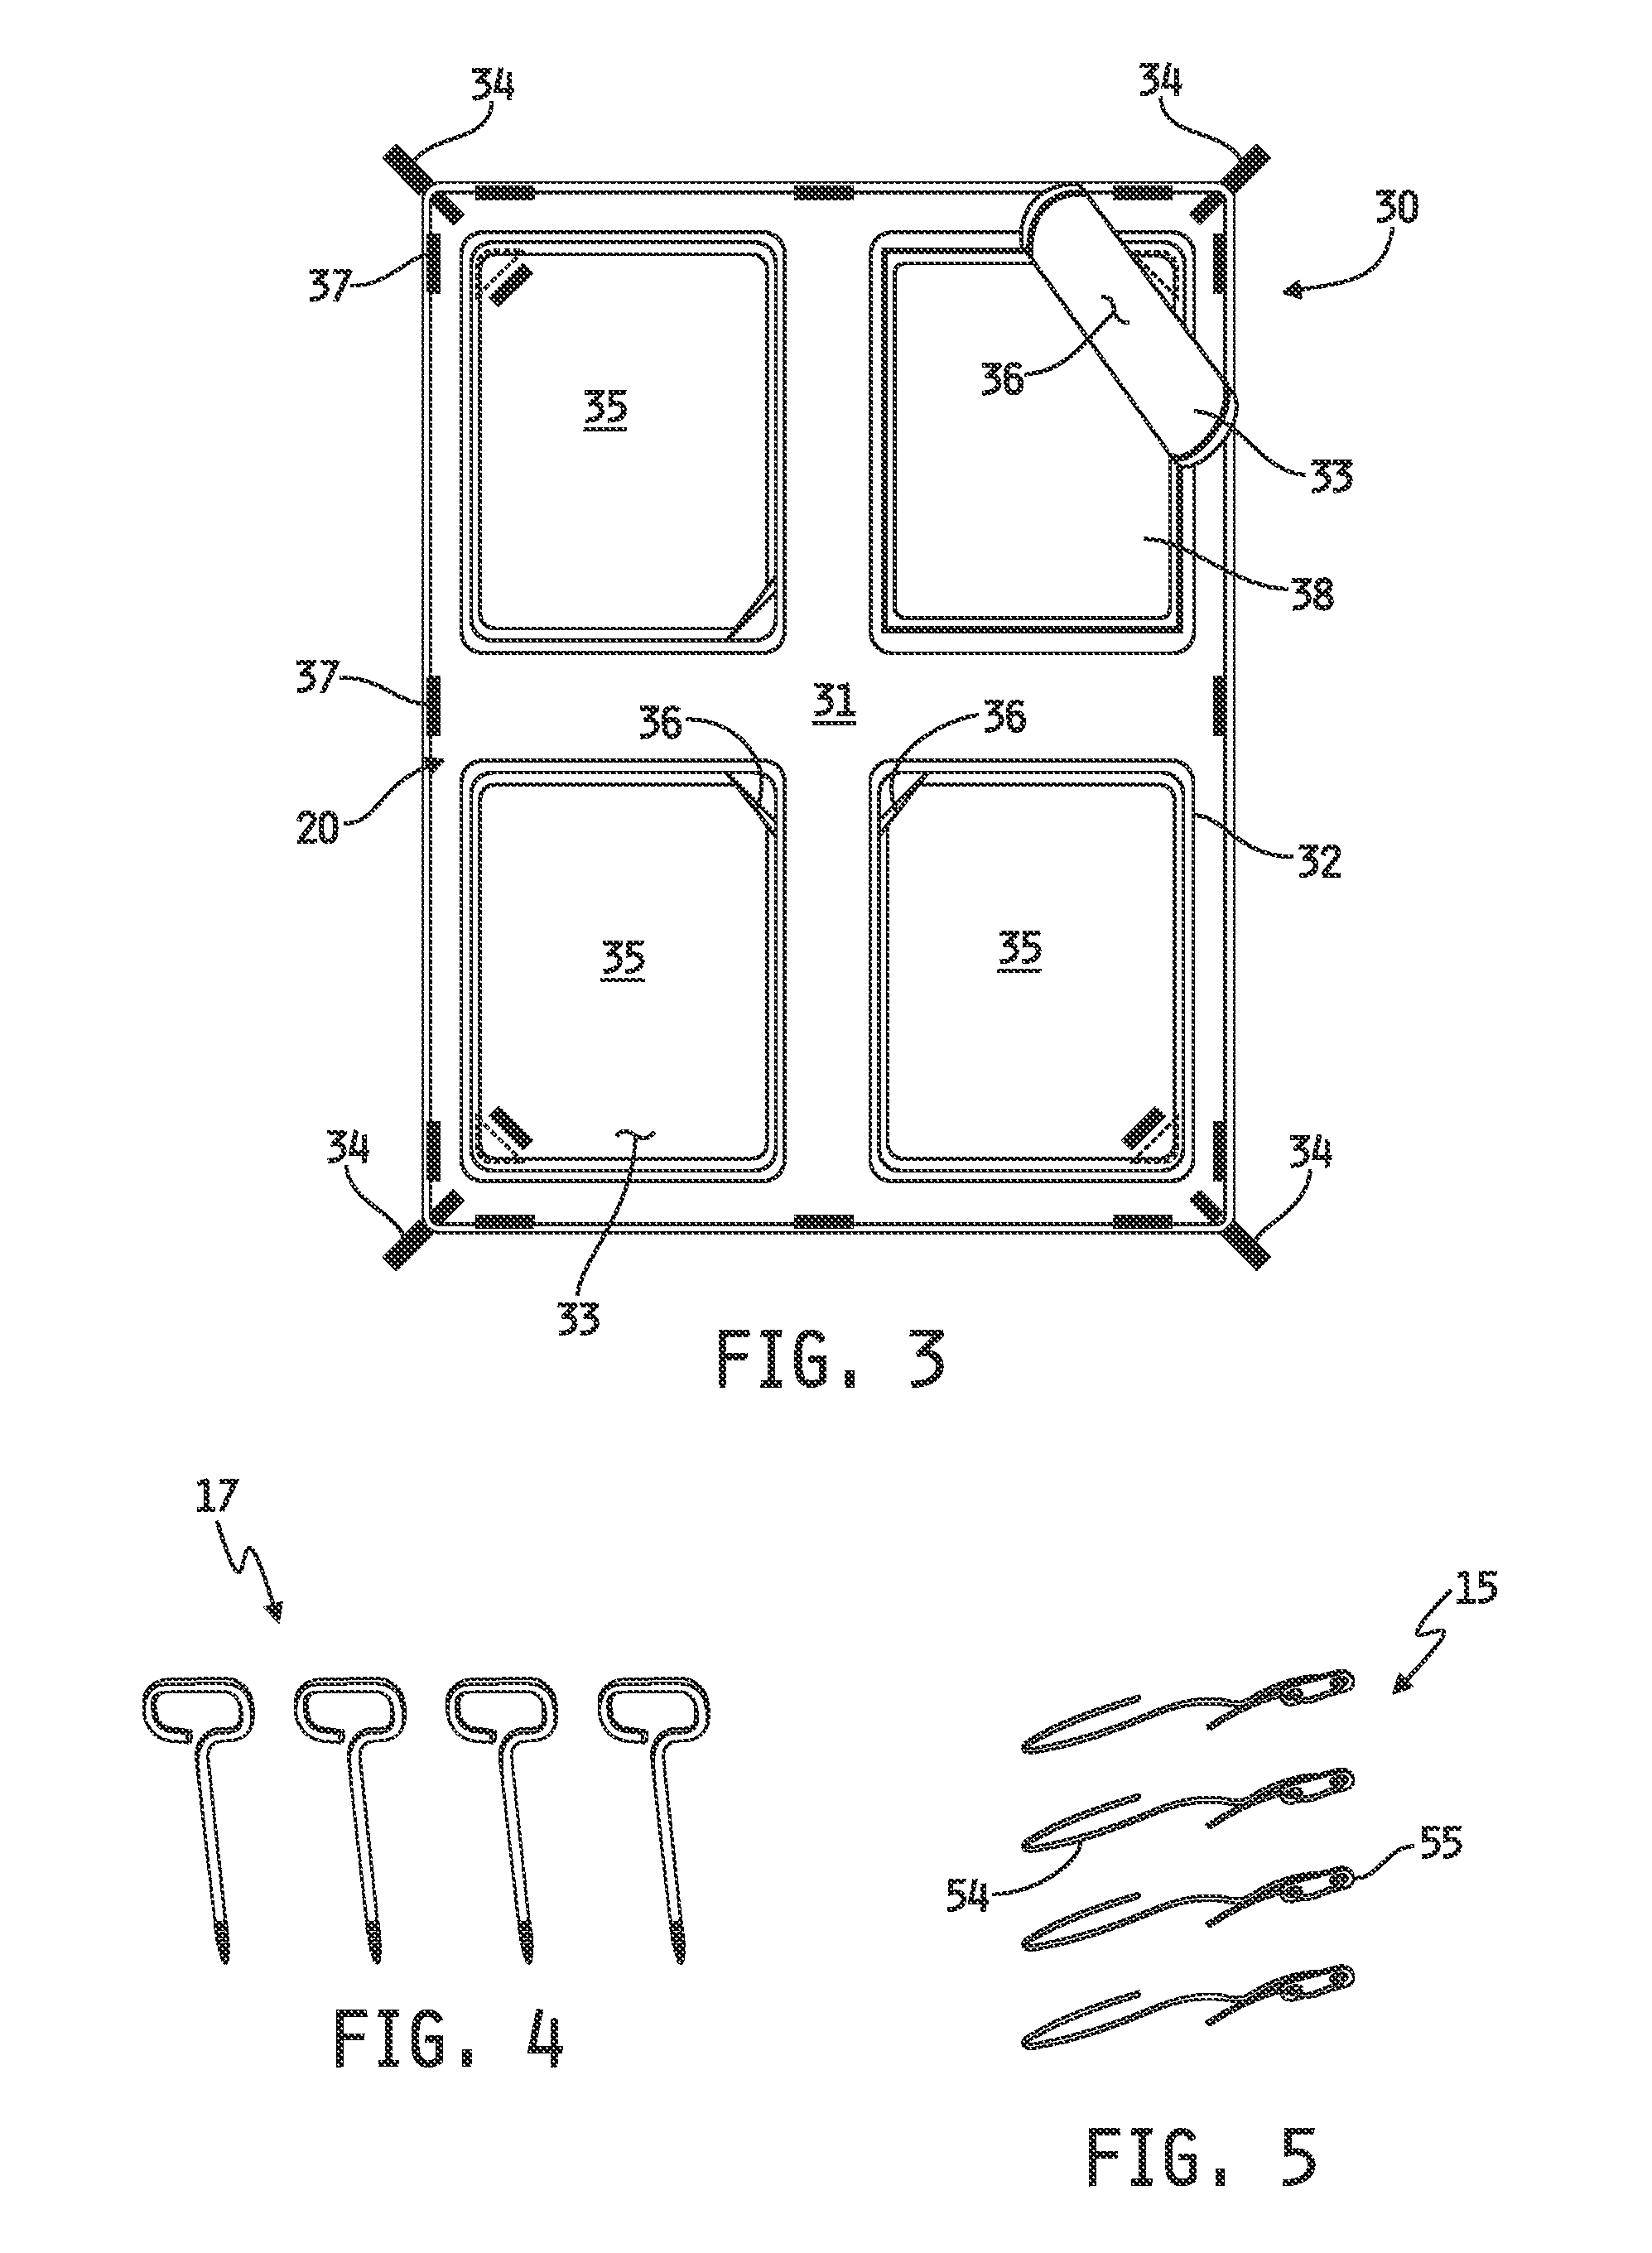 Method and apparatus for a portable enclosure